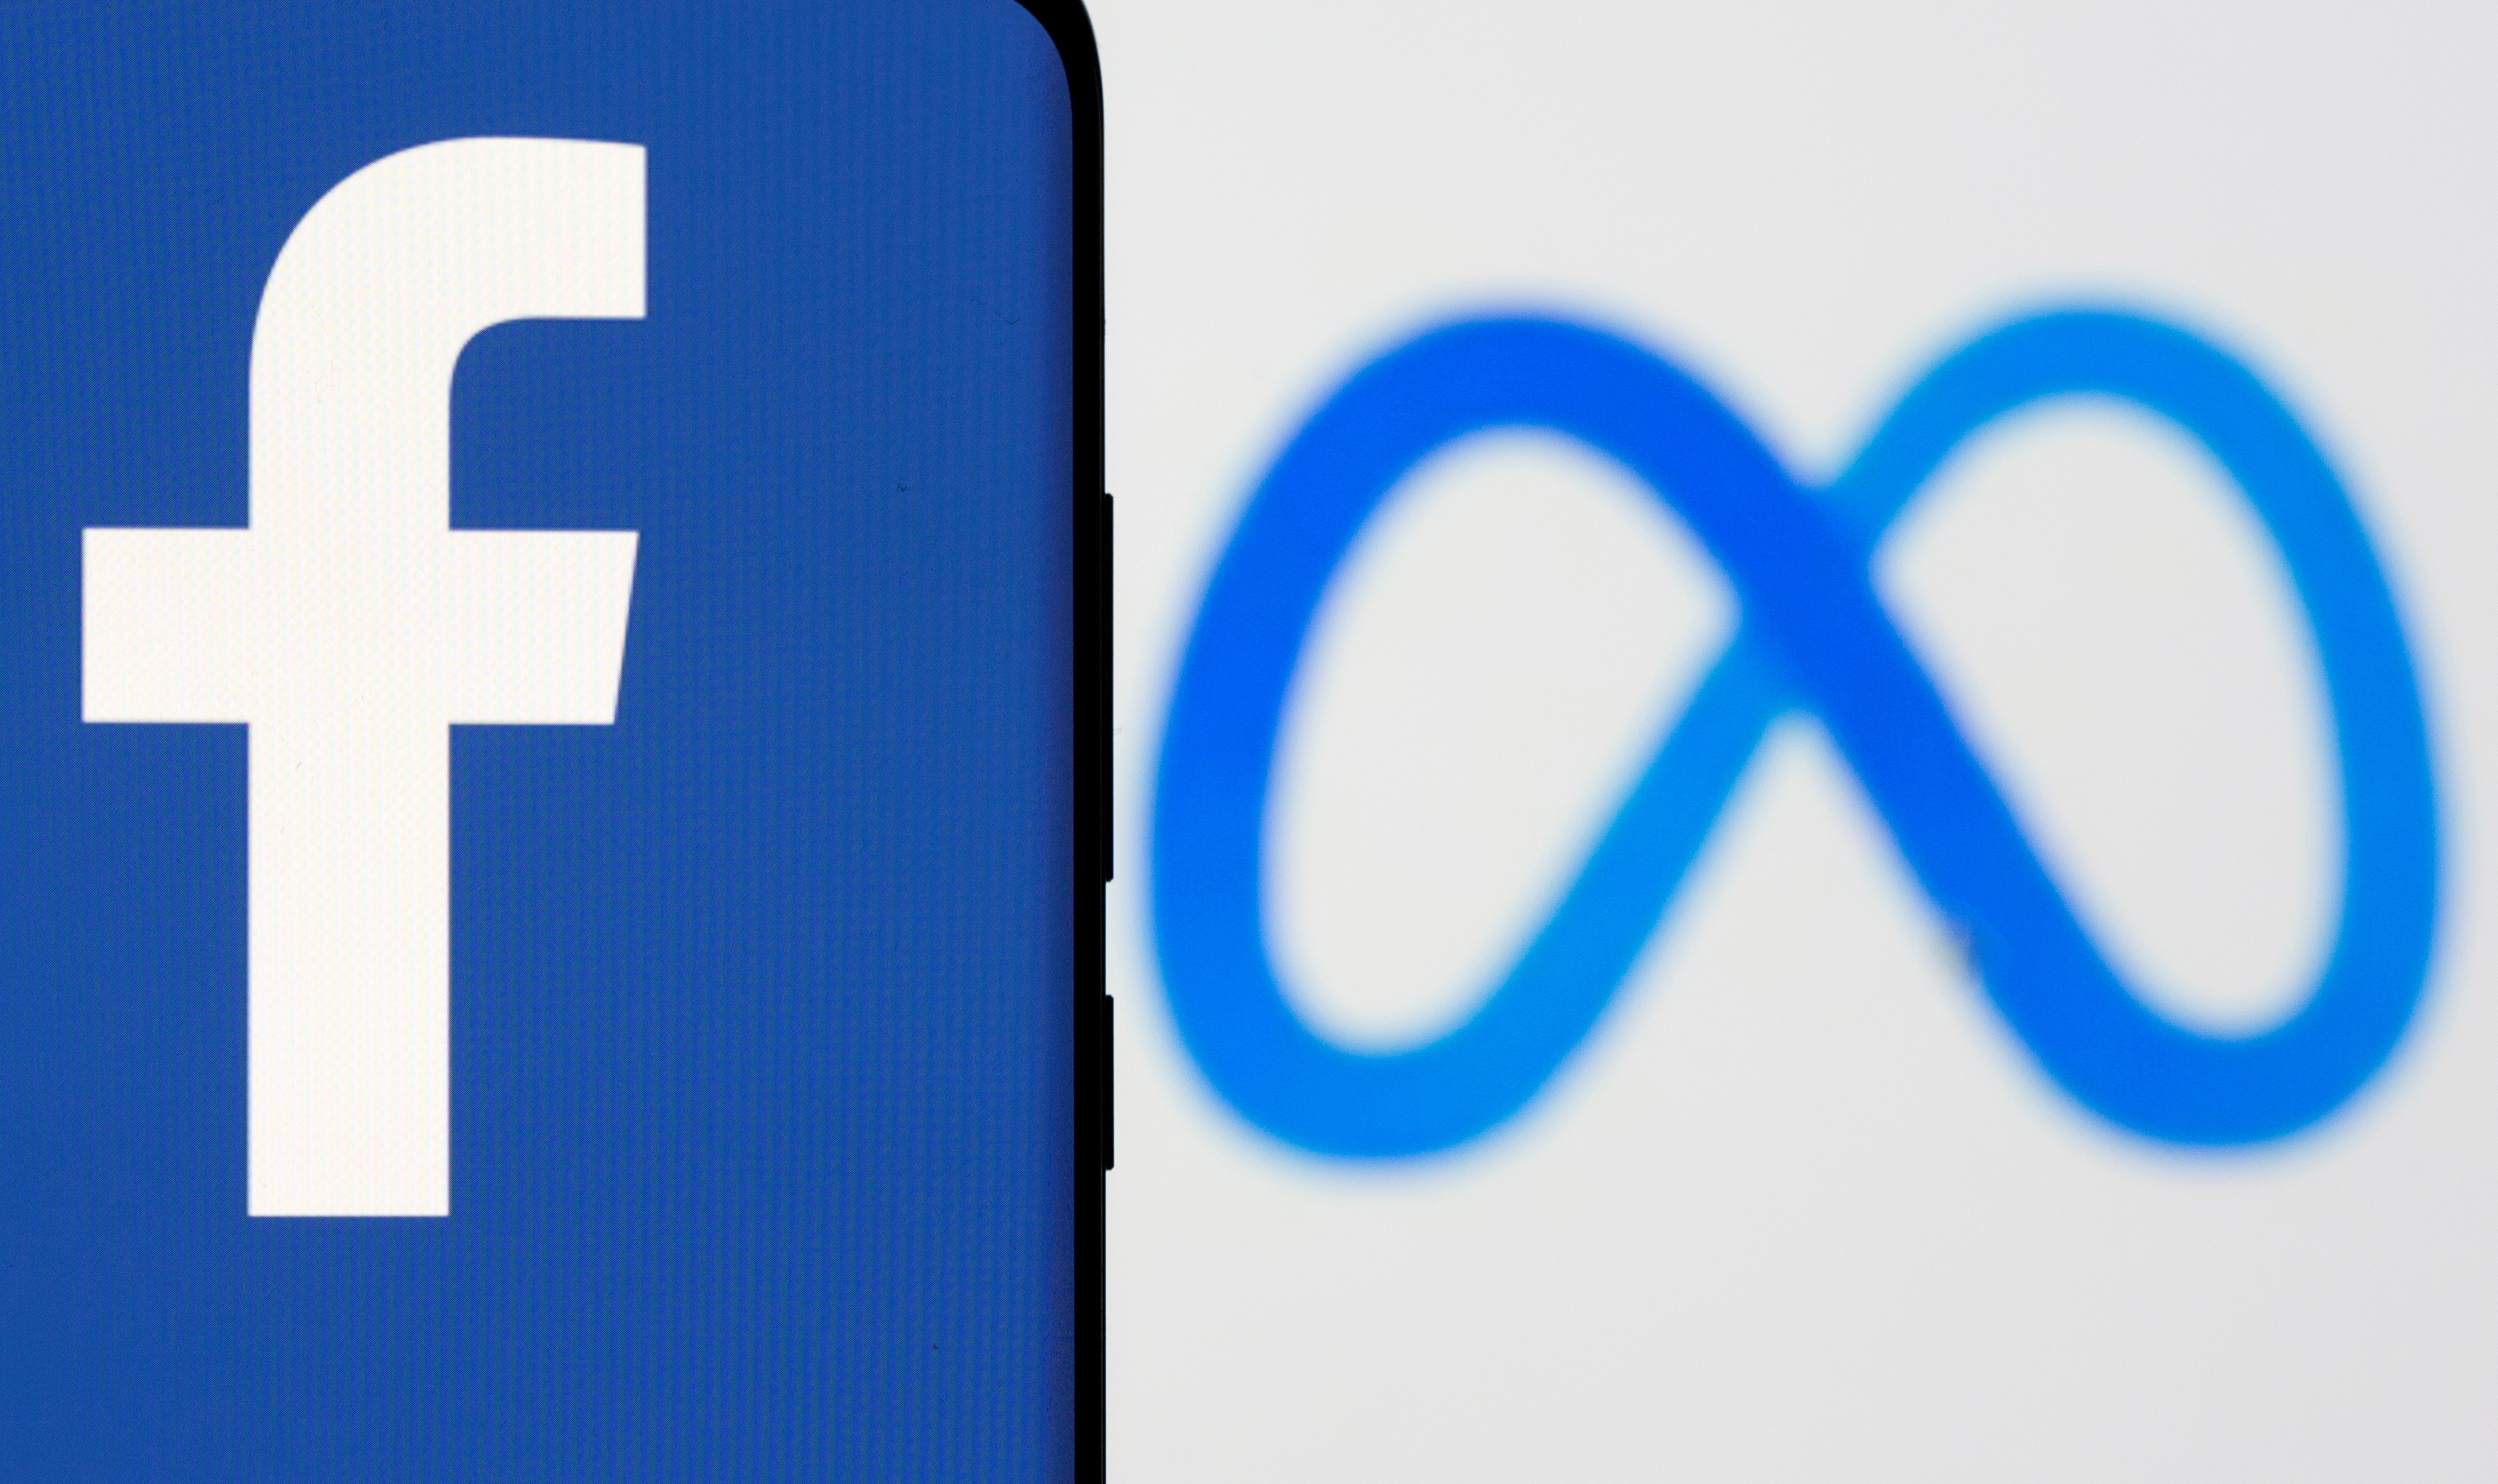 Facebook's new rebrand logo Meta is displayed behind a smartphone with the Facebook logo in this illustration picture